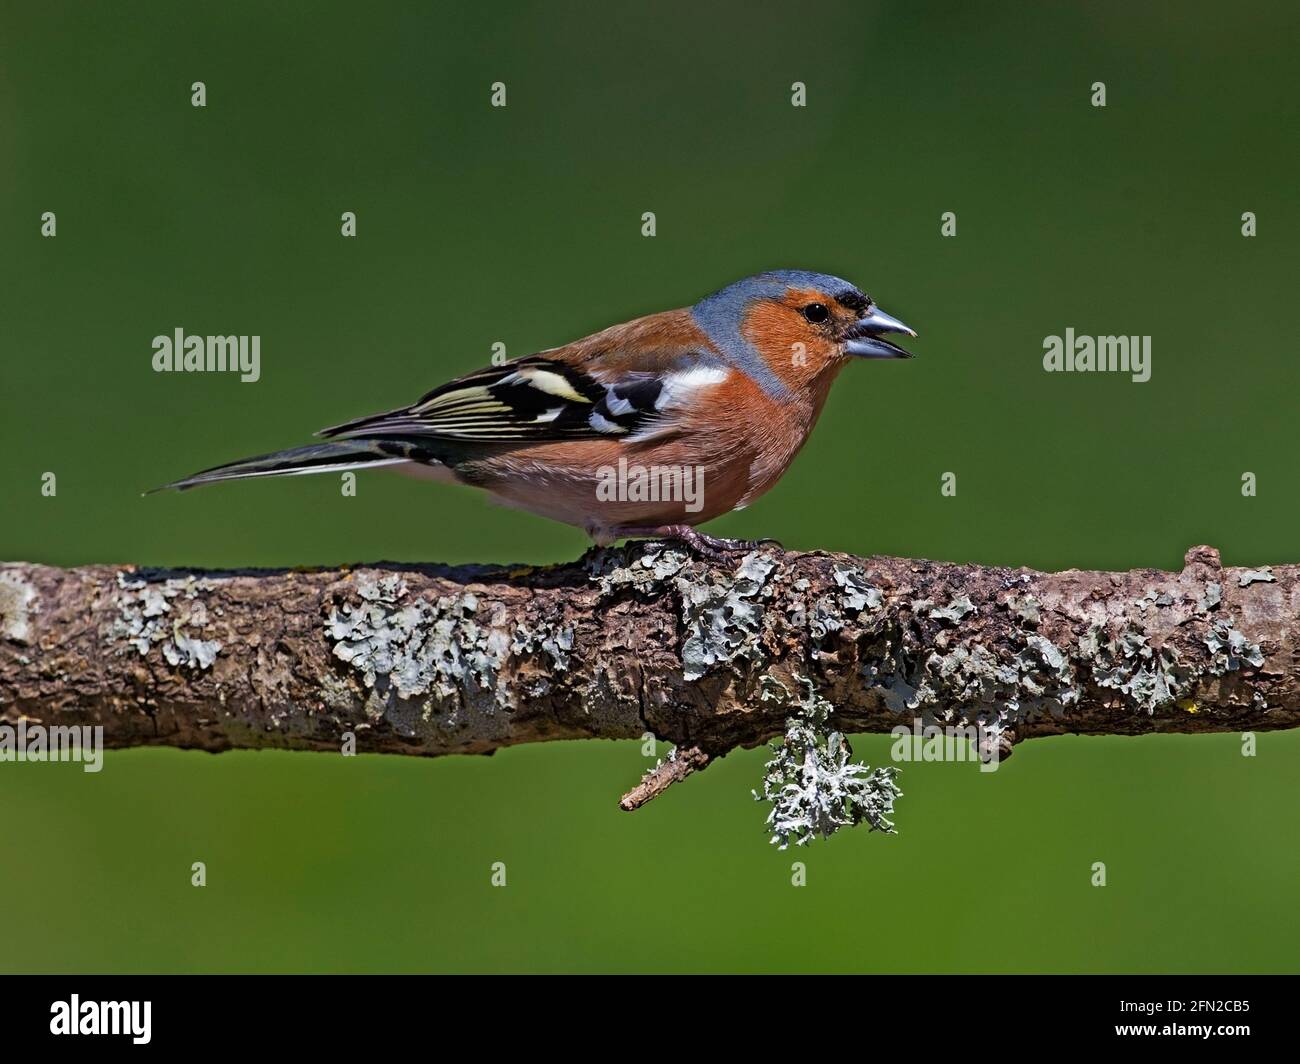 Male chaffinch perched on branch Stock Photo